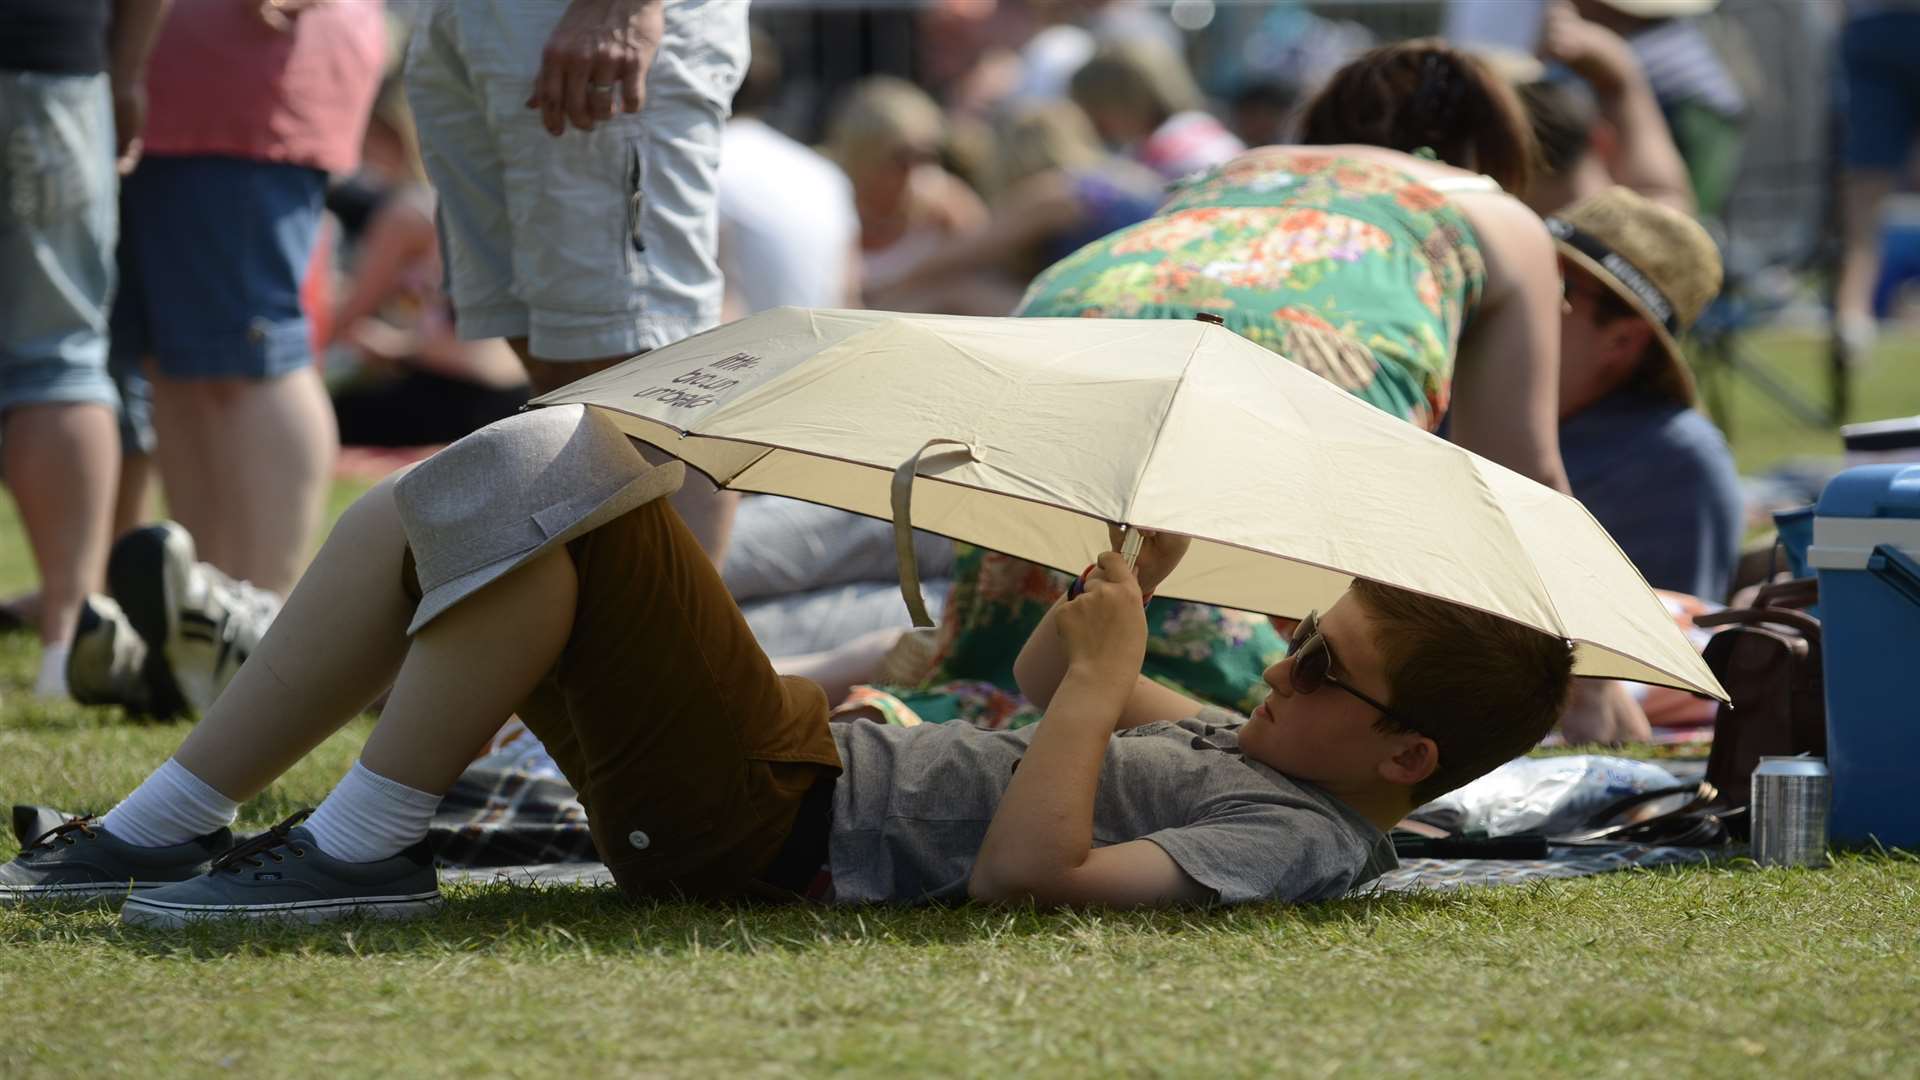 A music festival goer stays cool. Library picture